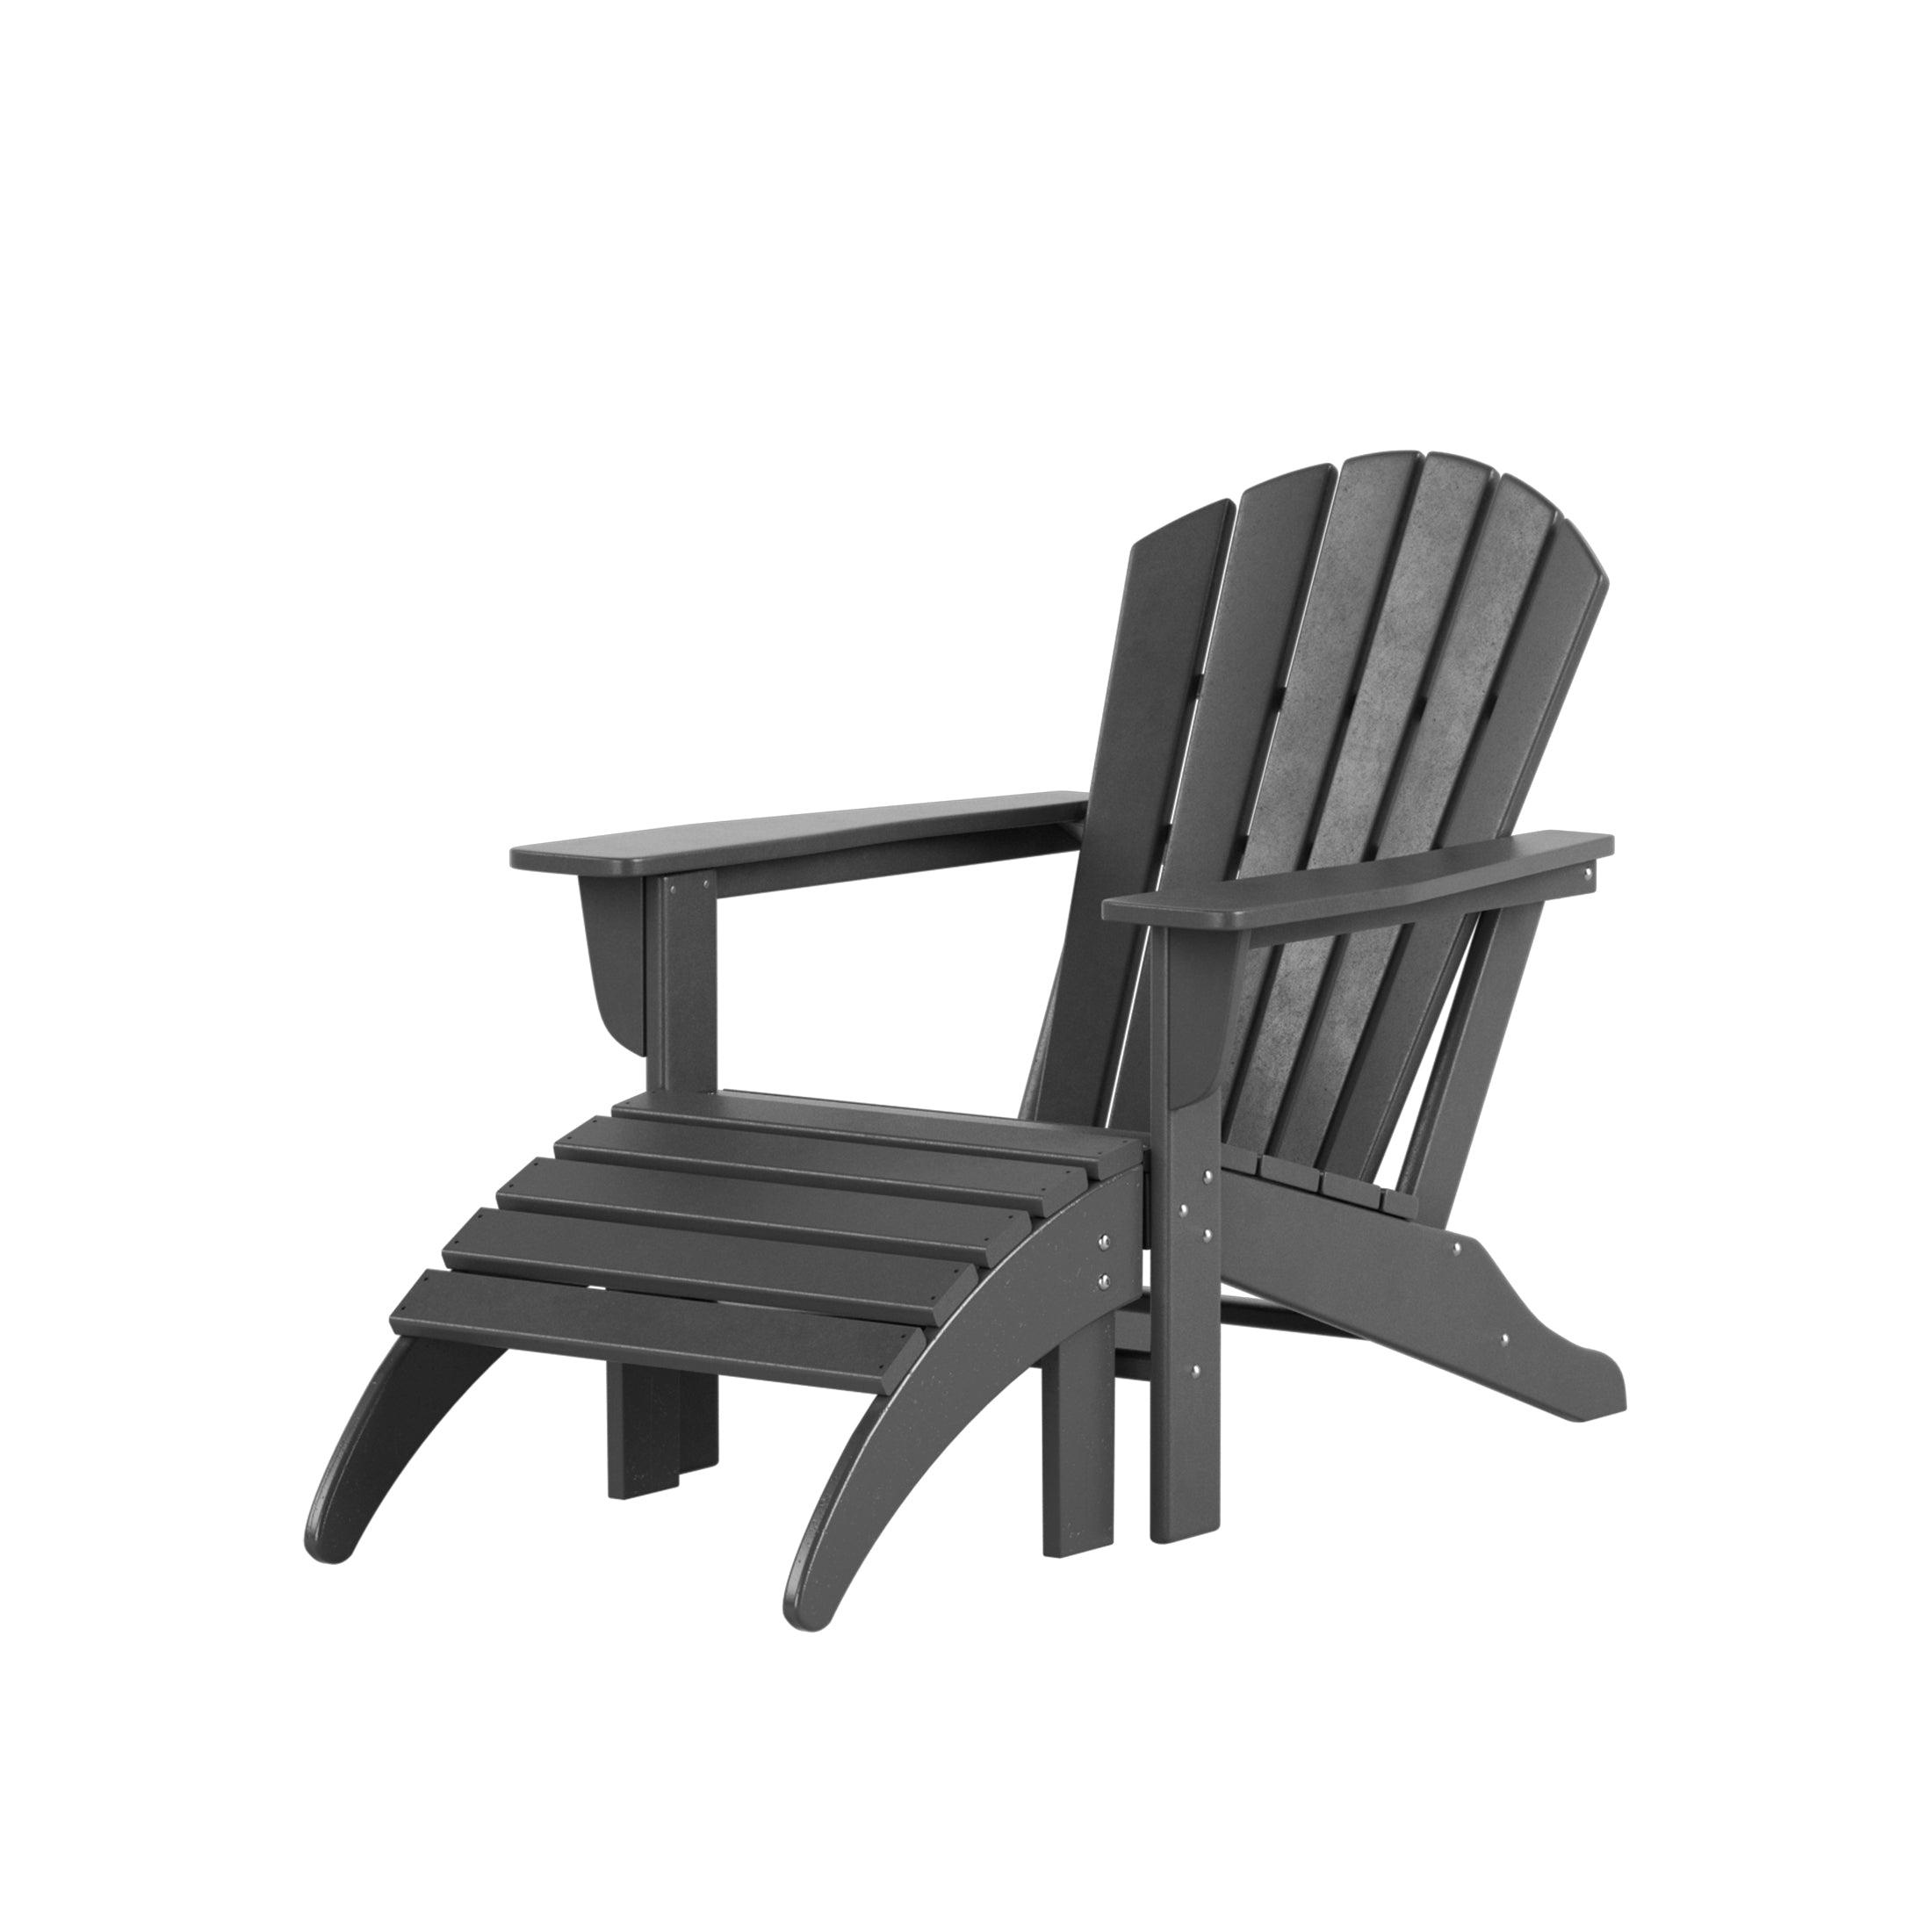 Costaelm Outdoor Adirondack Chair With Ottoman 2-Piece Set, Gray